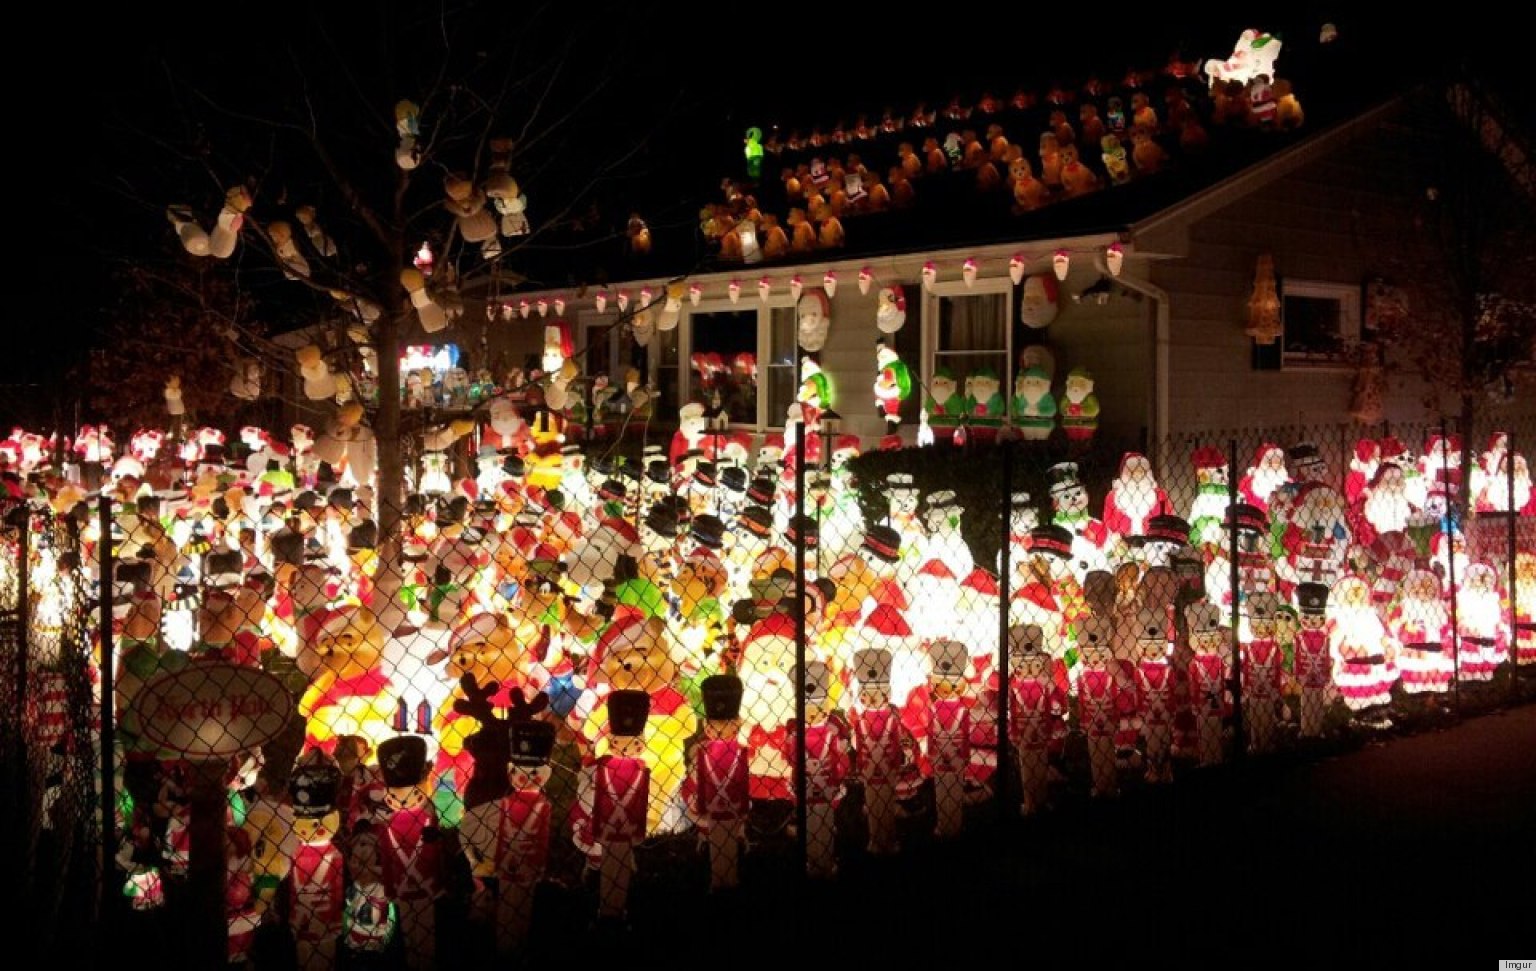 &#039;Santa Army&#039; Takes Over Yard In This Extreme Christmas Decoration